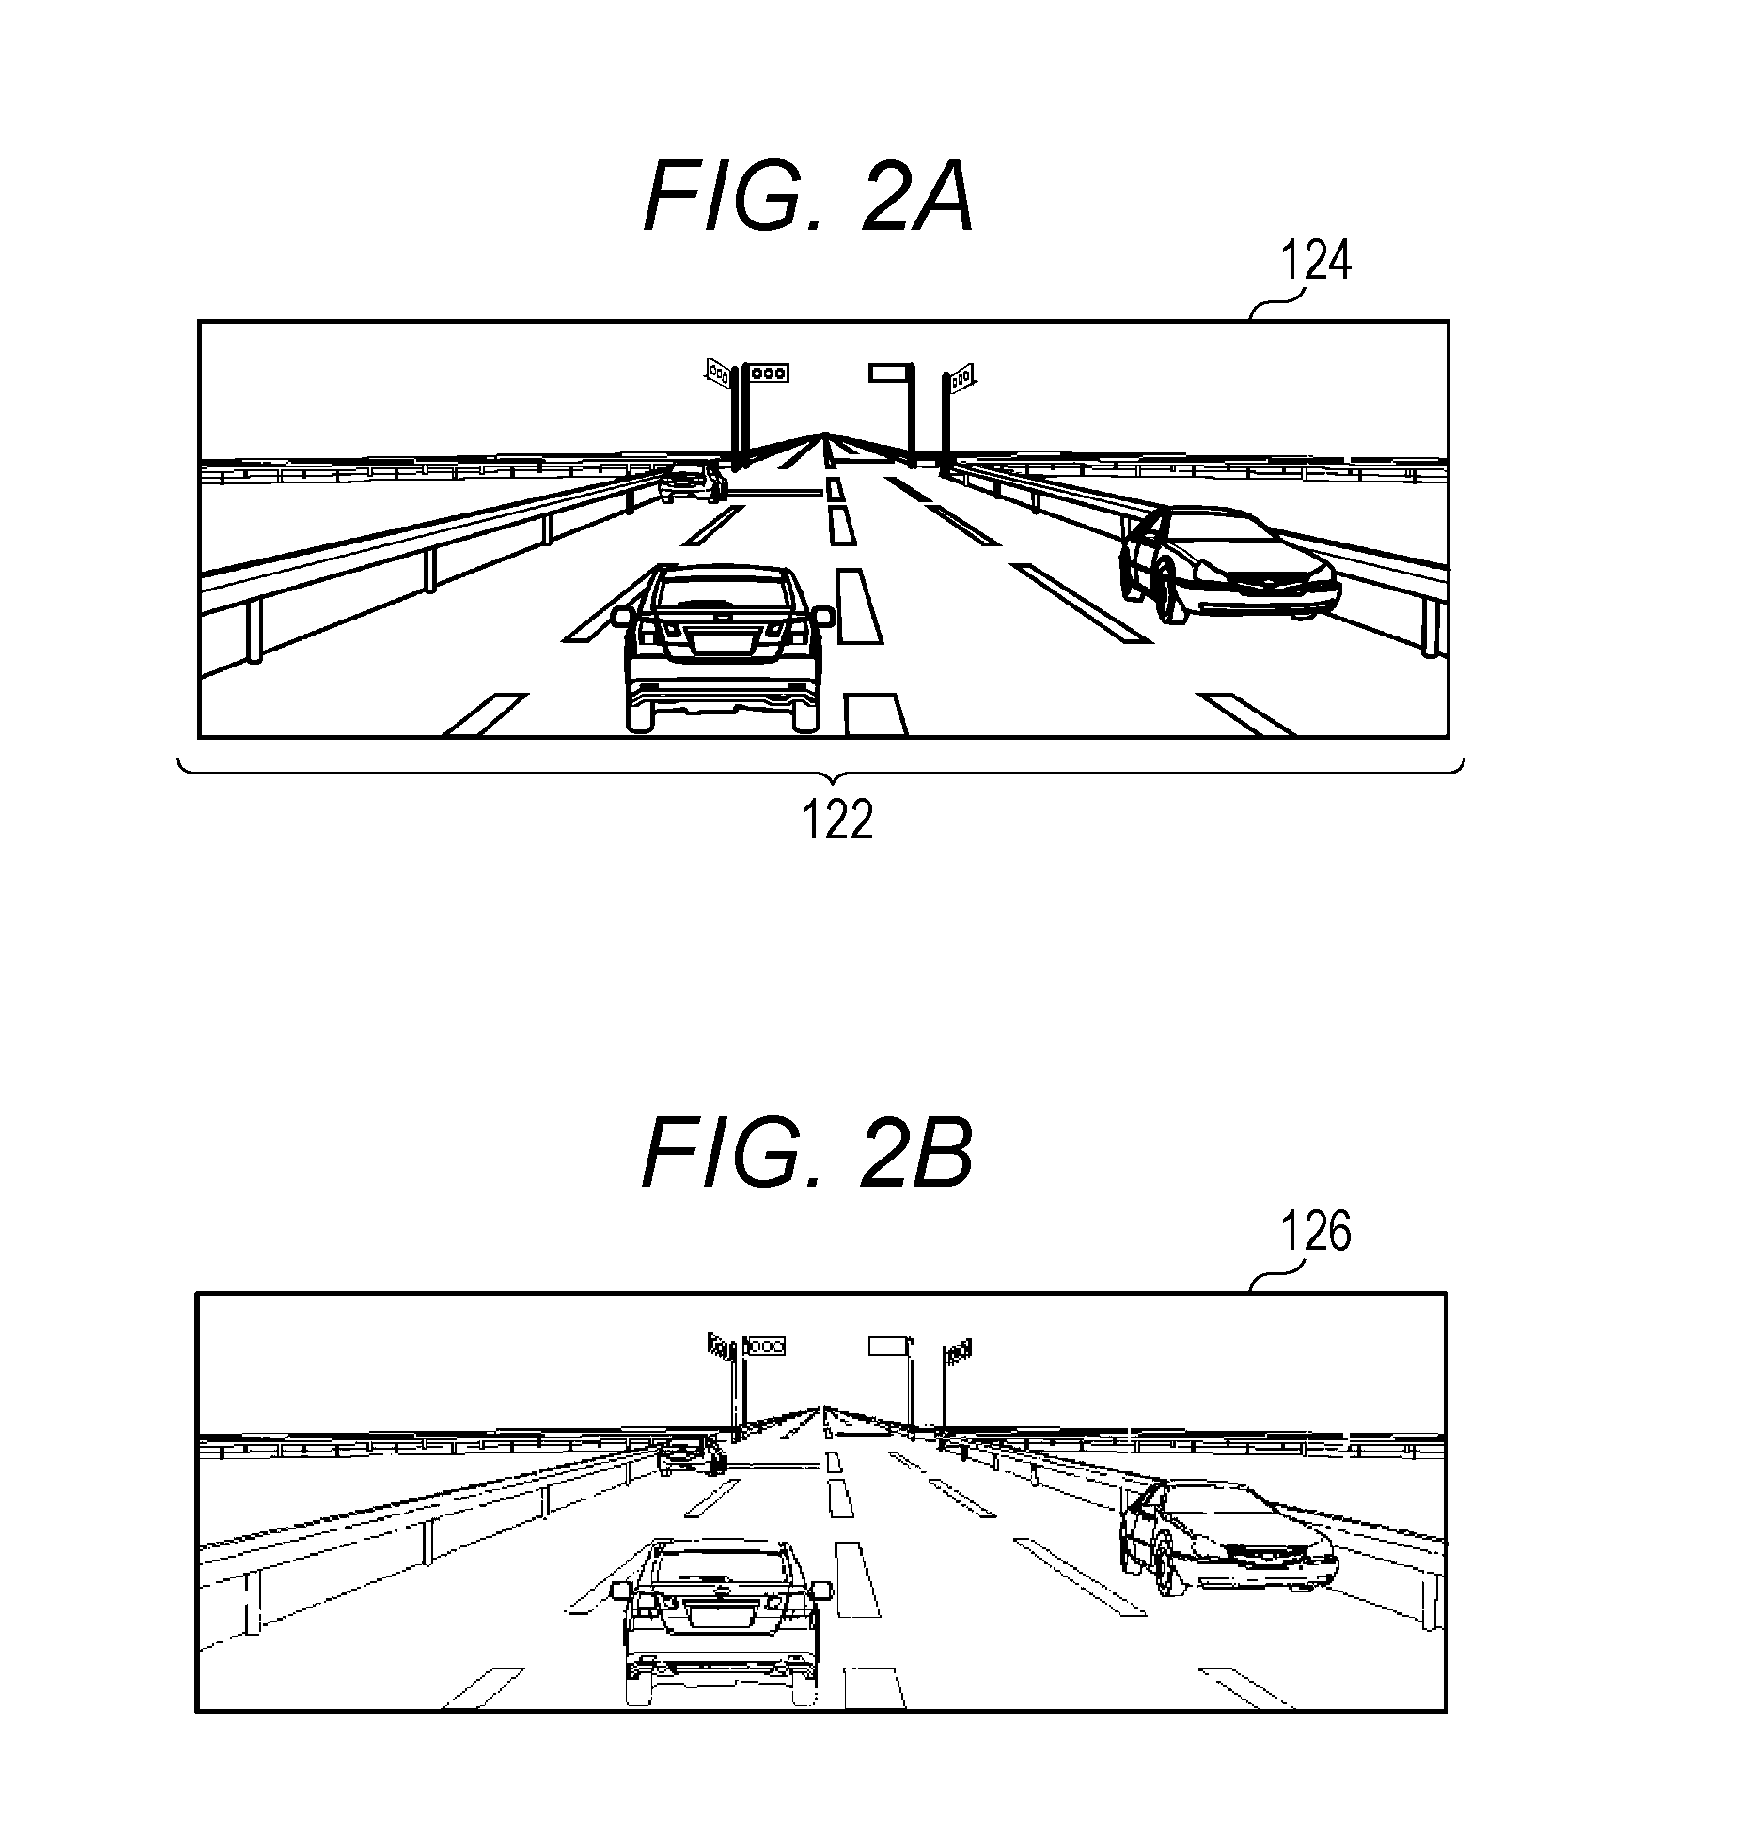 Exterior environment recognition device